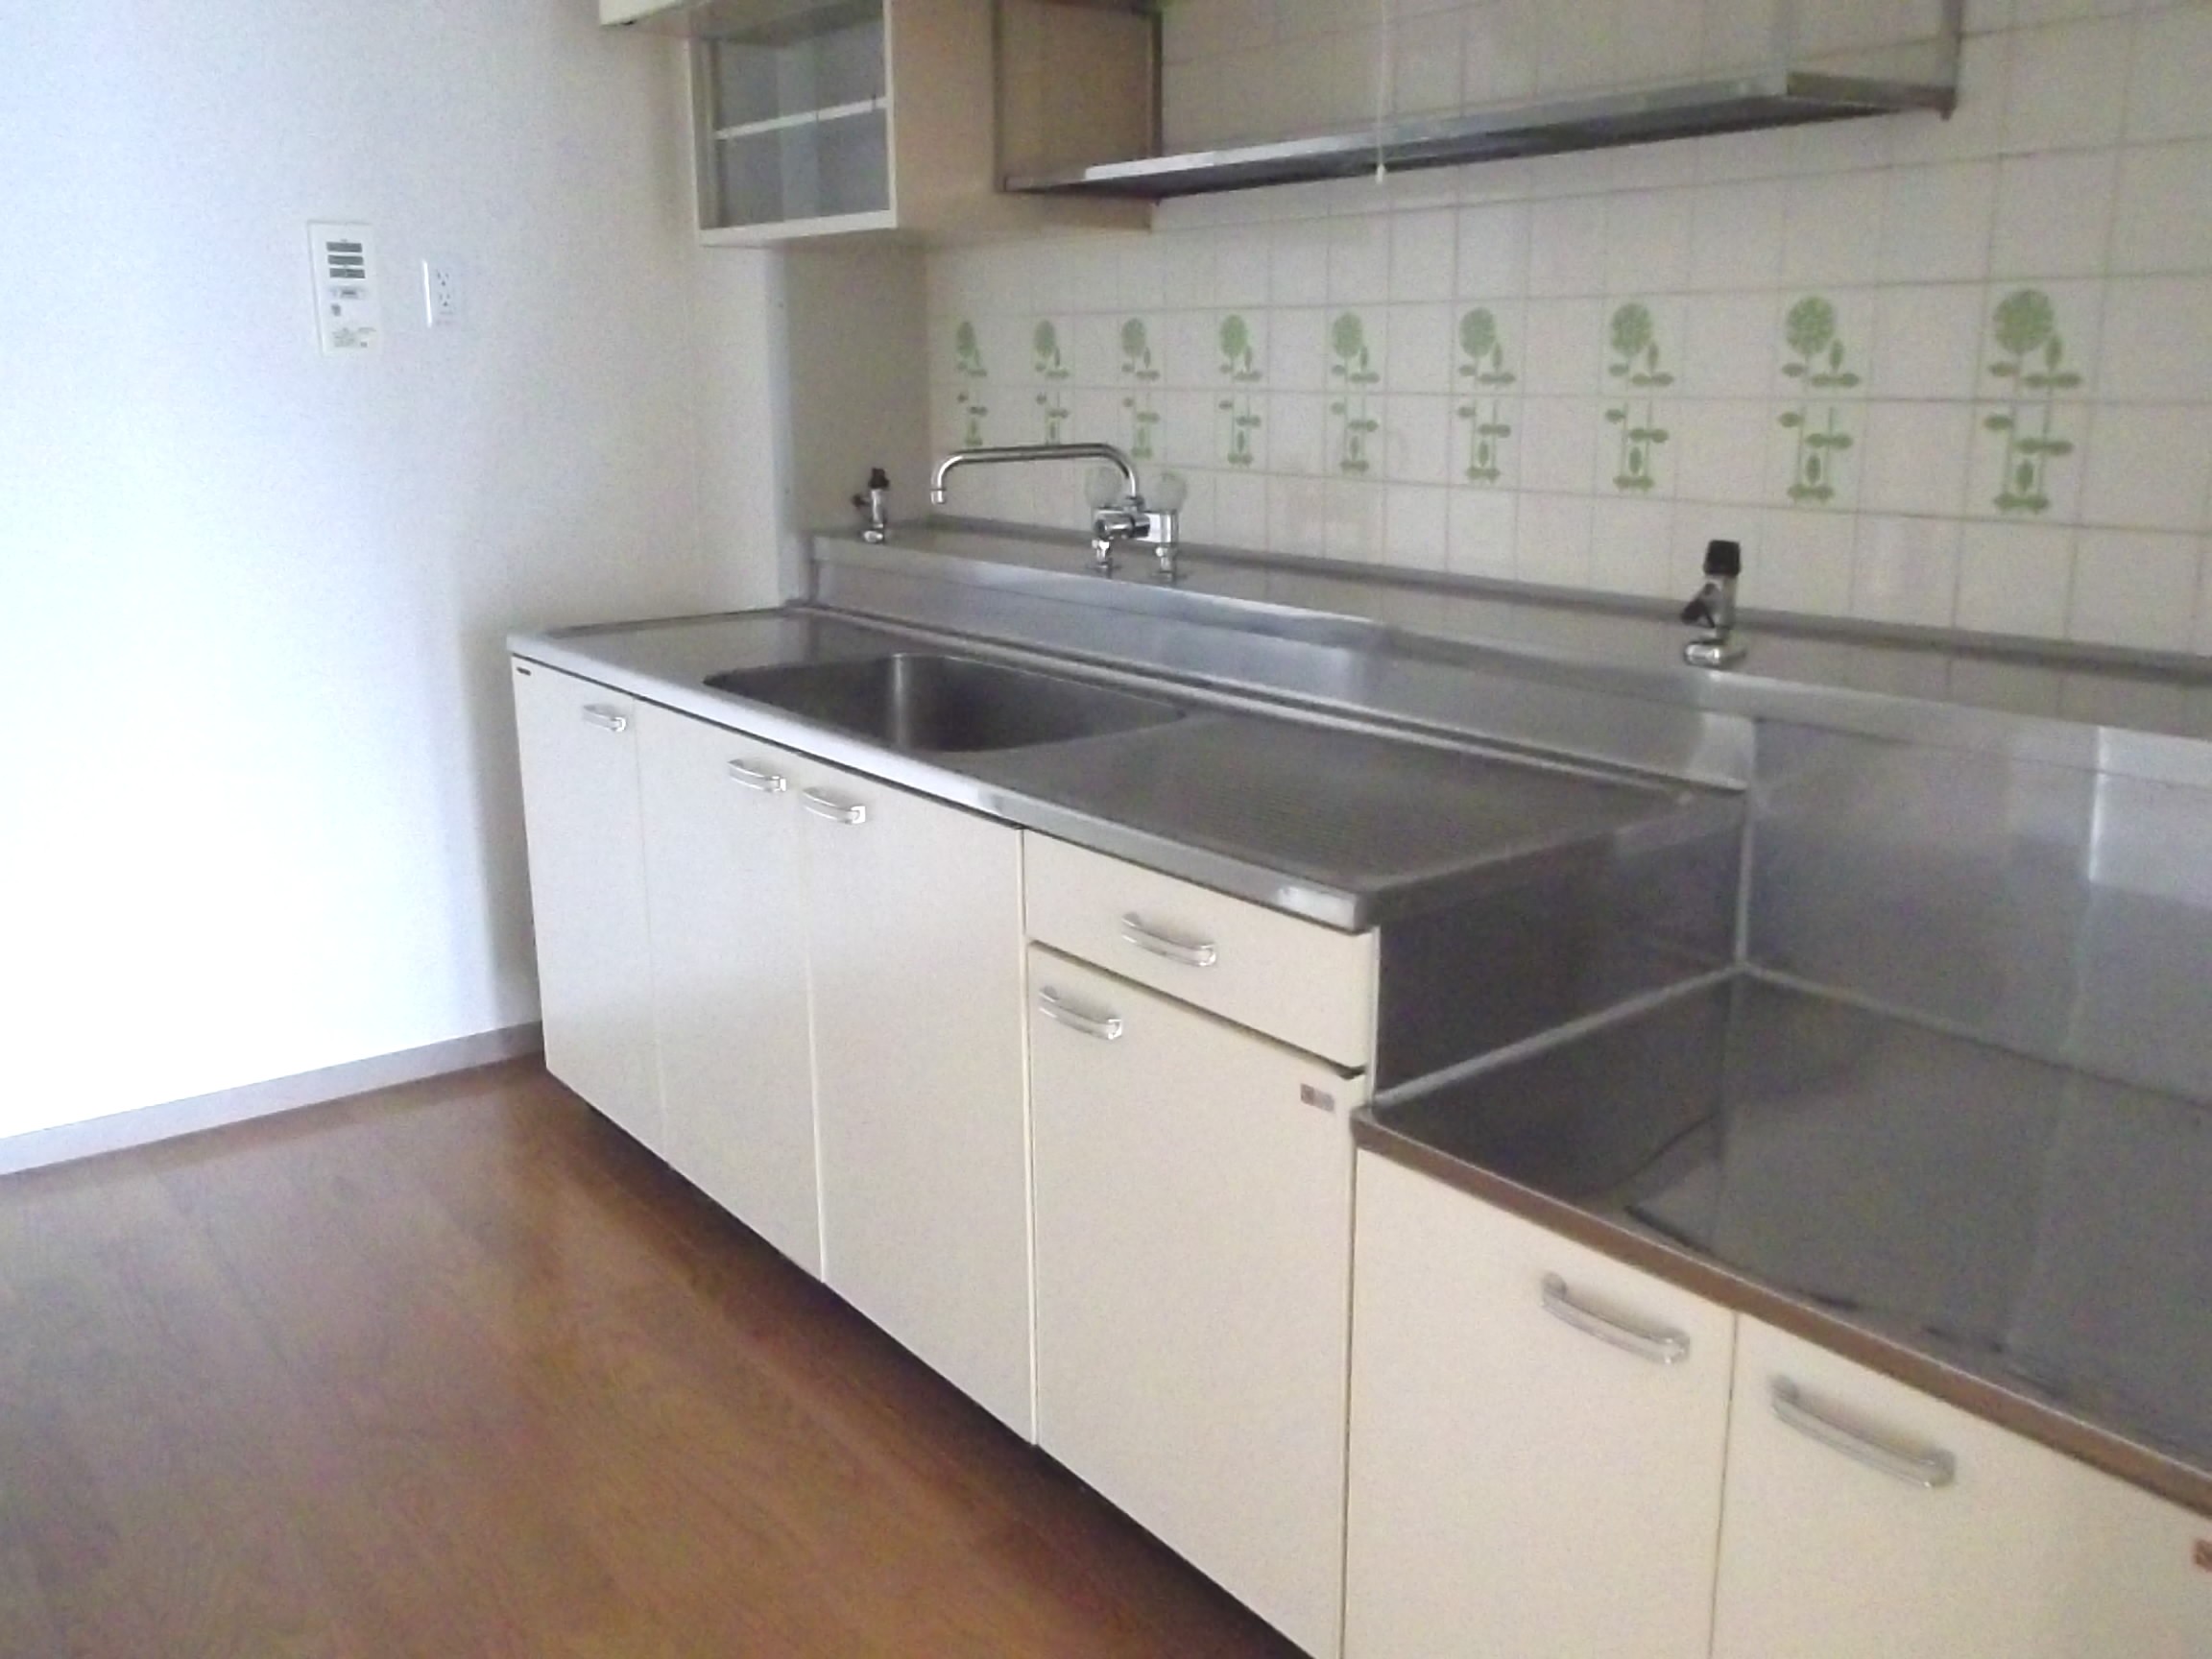 Kitchen. Indoor photos posted of the same type ※ Such as tiles and flooring may be different